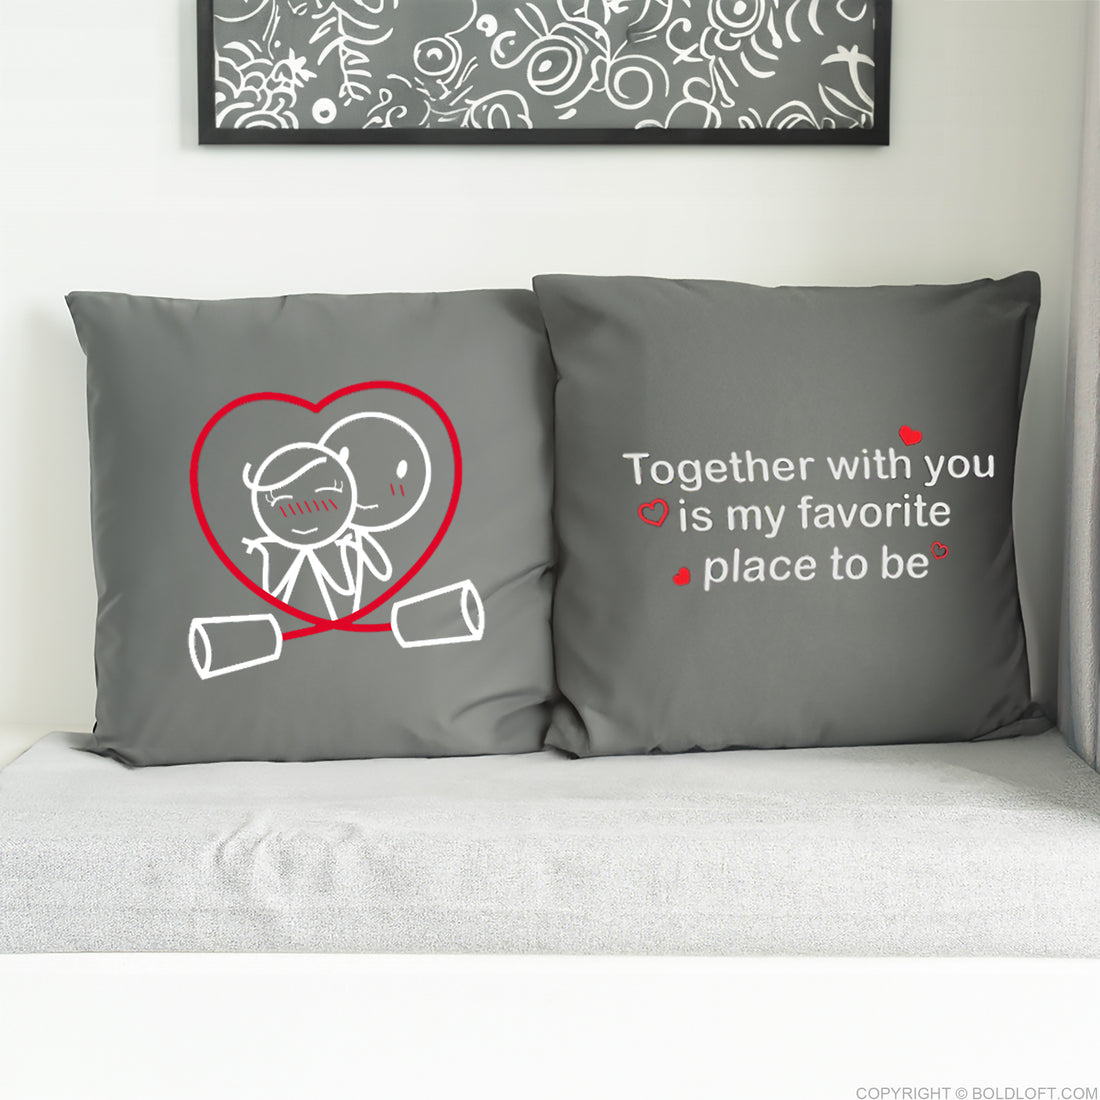 BoldLoft Together with You Euro Pillow Covers for Couples, whimsical euro pillow covers in grey with cute stick figure design and a love quote